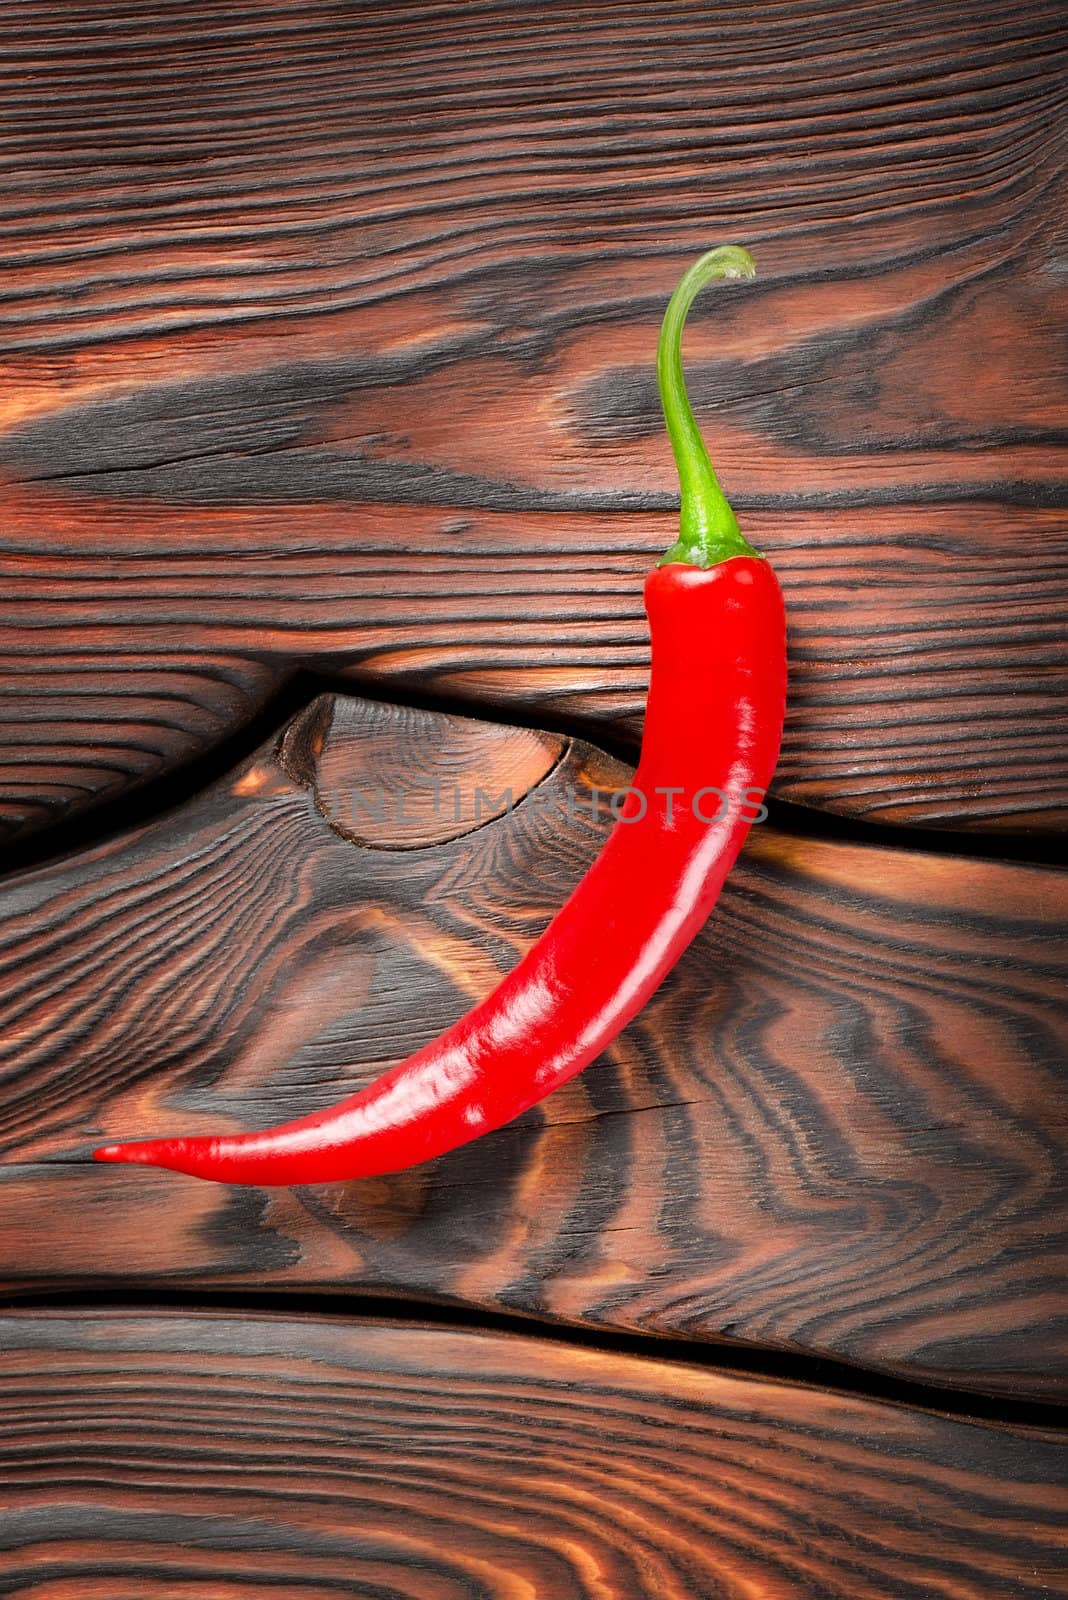 Red chili pepper by Givaga